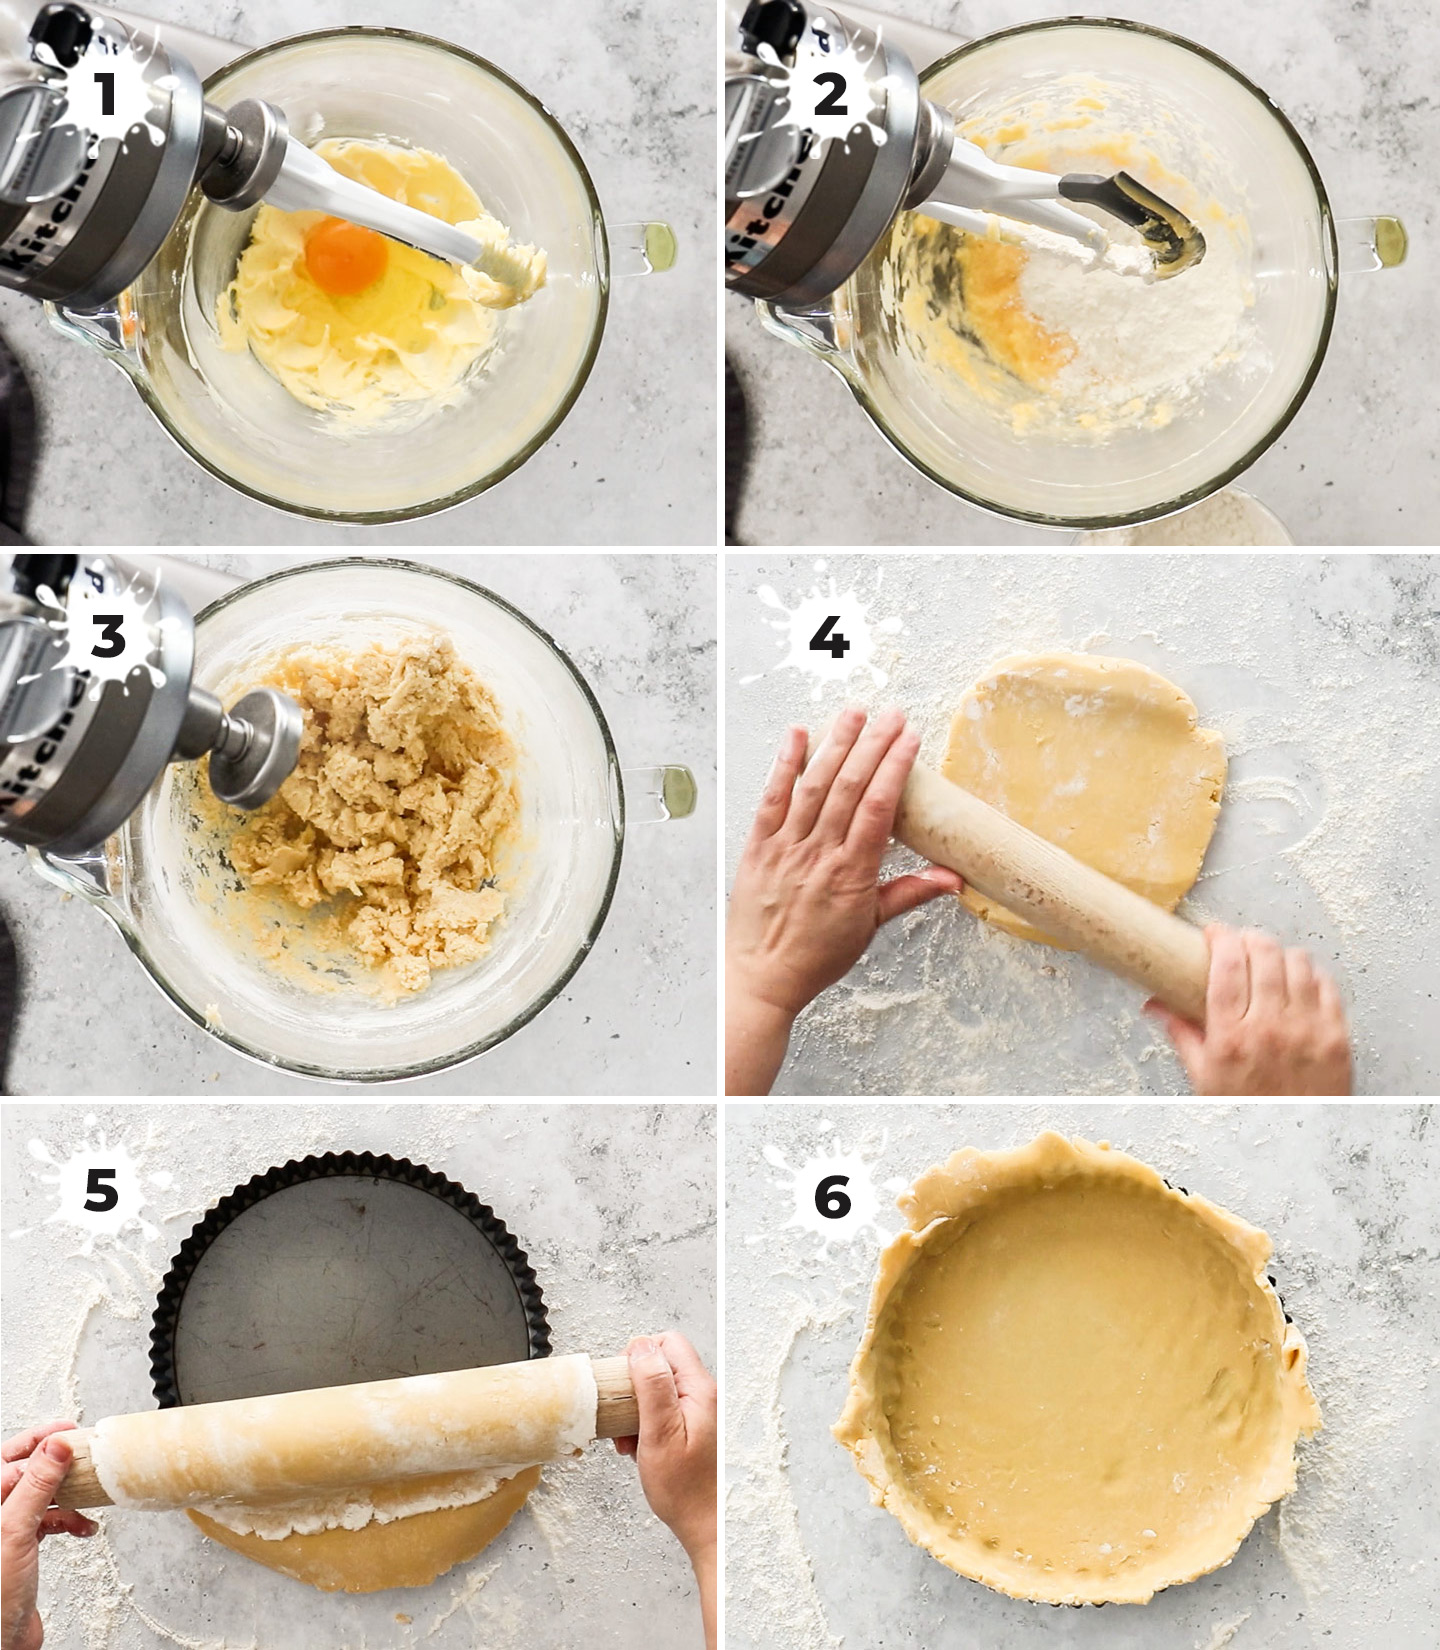 A collage showing how to make and form the pastry.